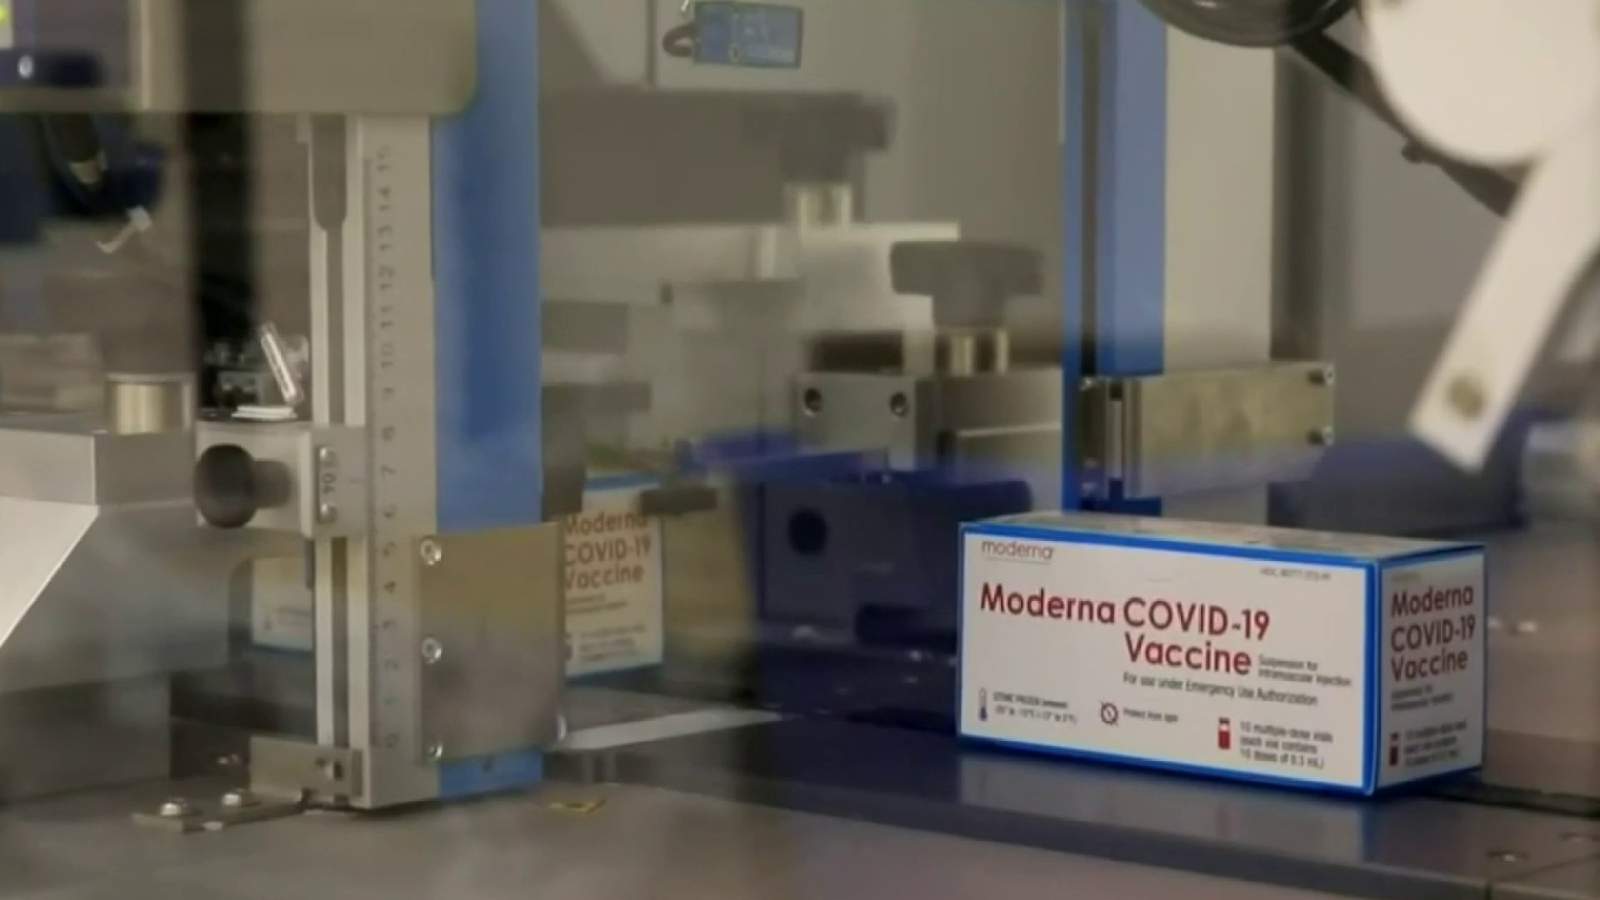 Nearly 12,000 doses of the Modern COVID-19 vaccine ruined en route to Michigan, state officials say